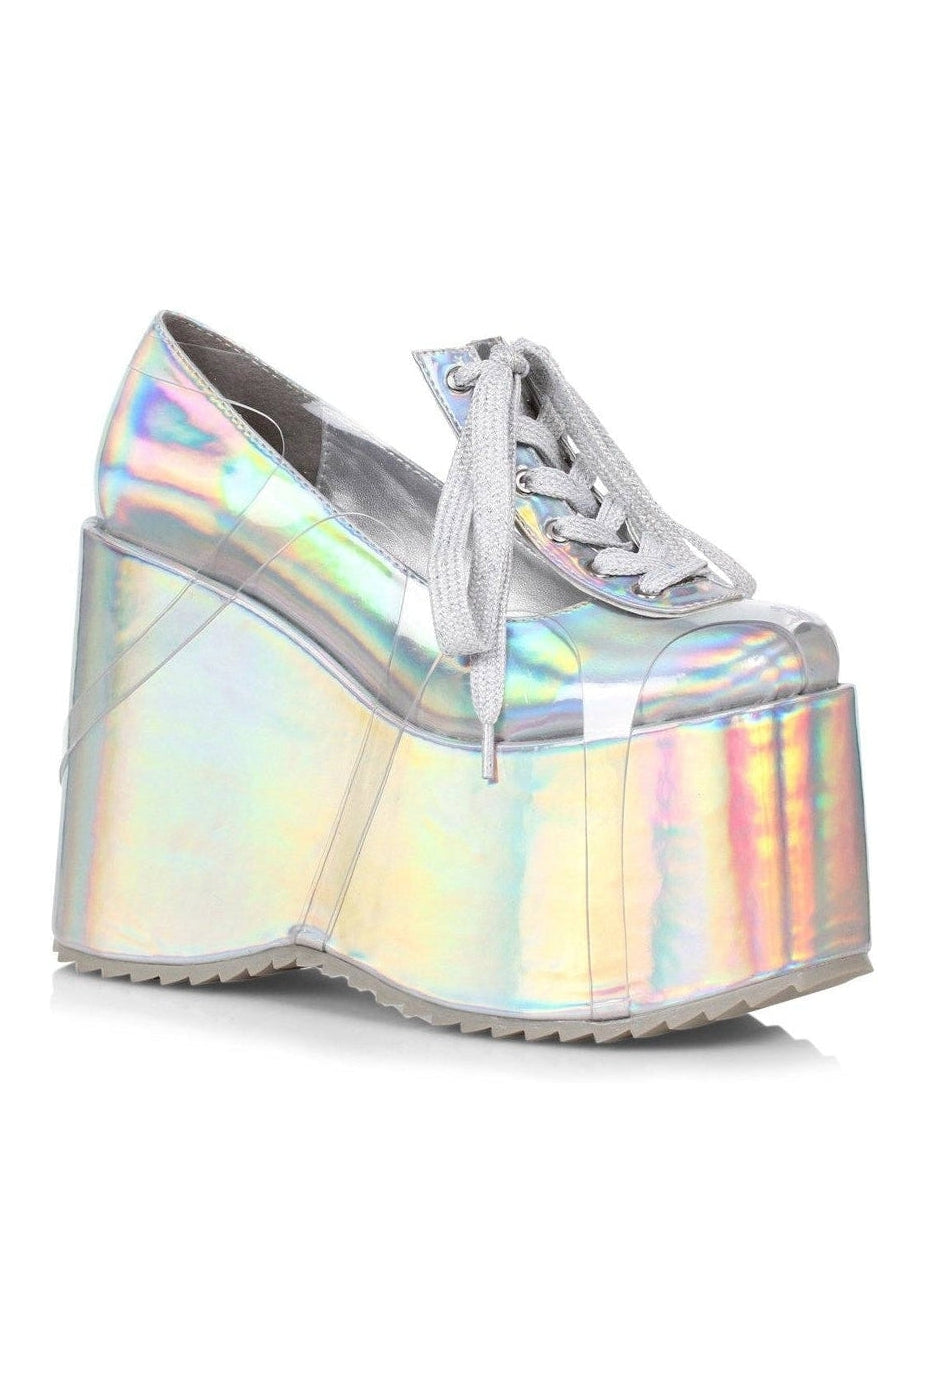 500-SUNNY Wedge | Hologram Faux Leather-Wedge-Ellie Shoes-SEXYSHOES.COM